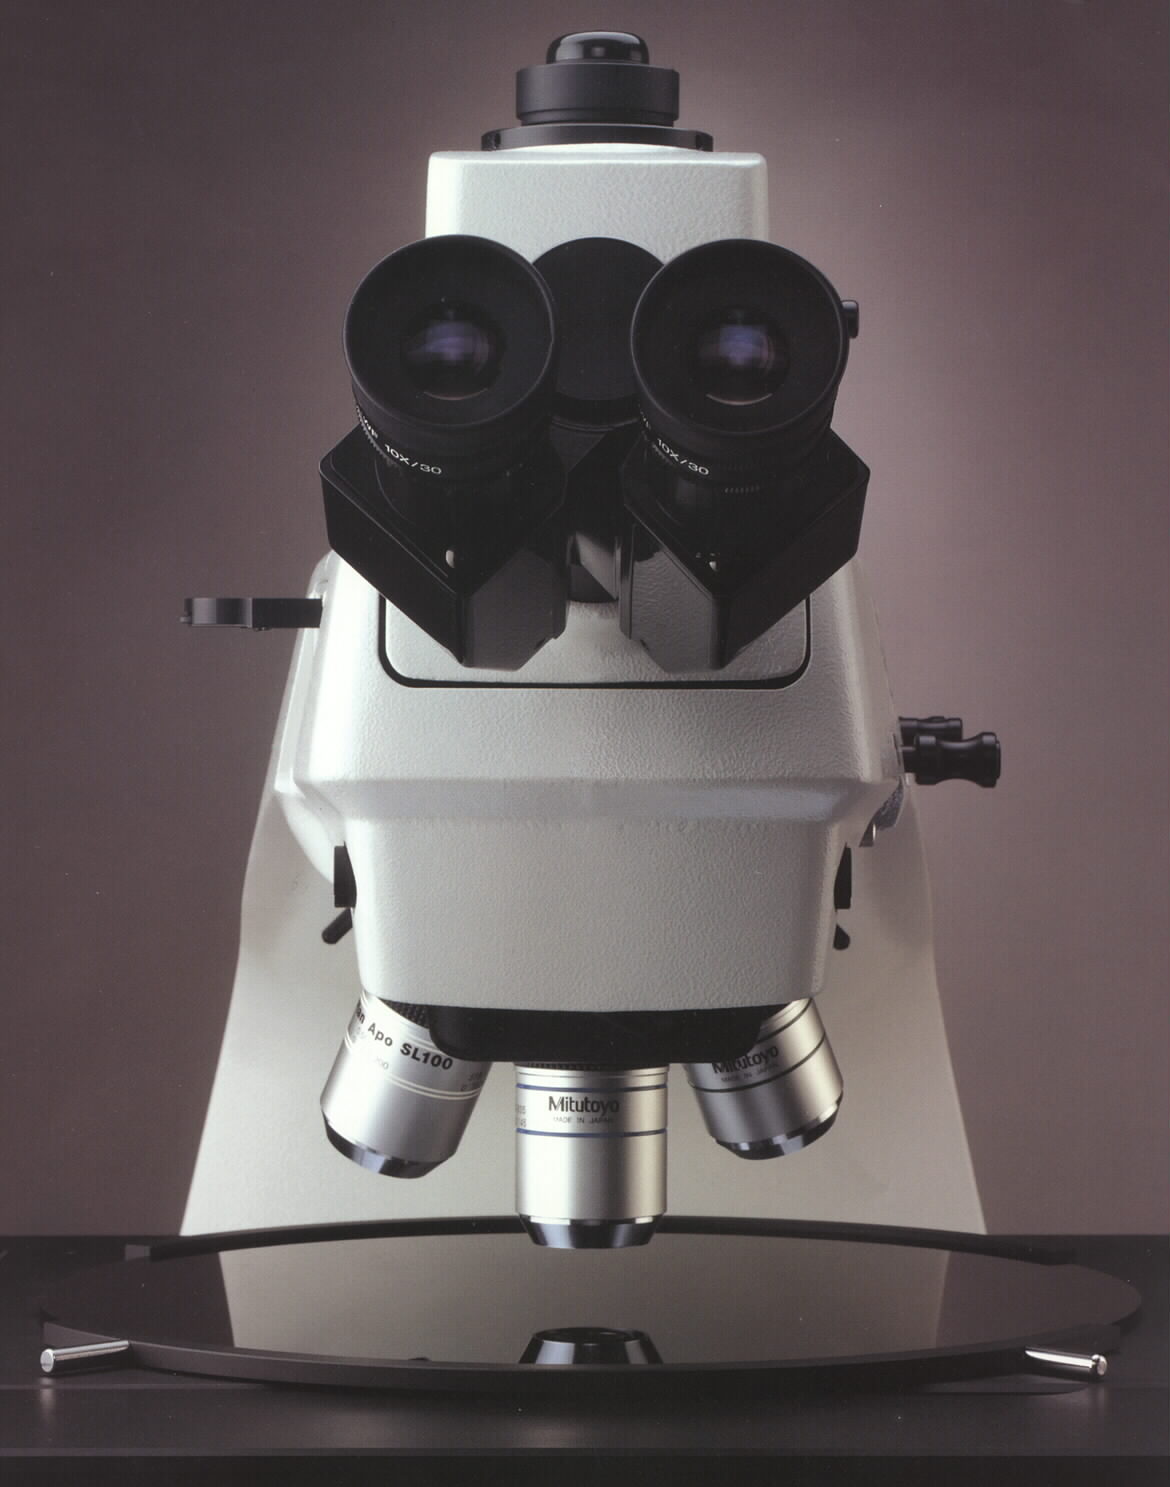 Capra Products Long Working Distance Microscopes